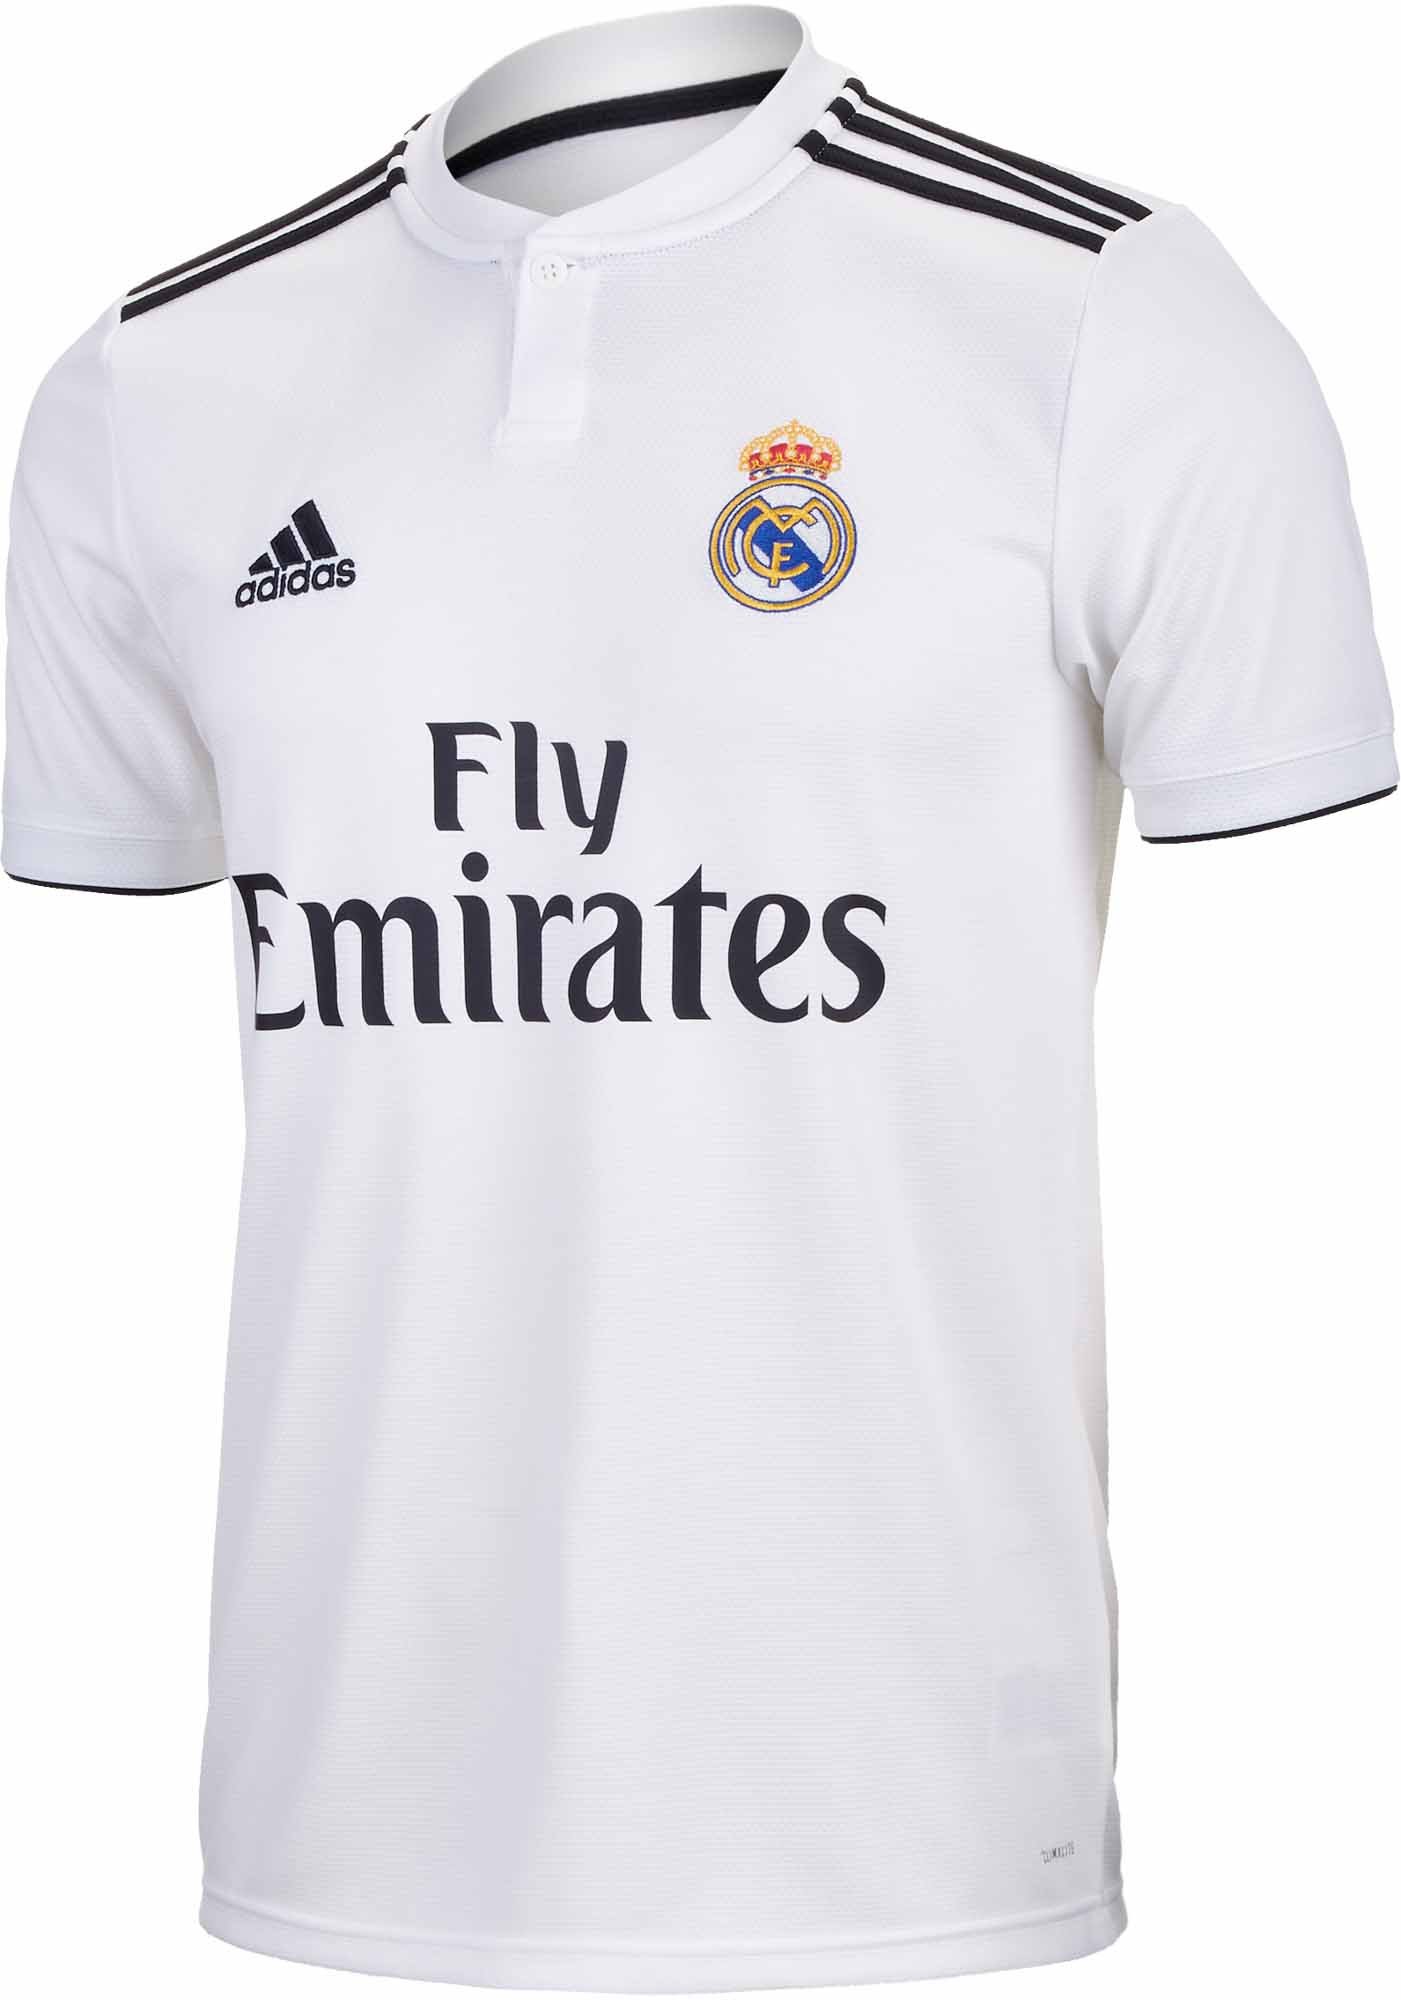 Gareth Bale Official Real Madrid Shirts Now Available - World Soccer Talk